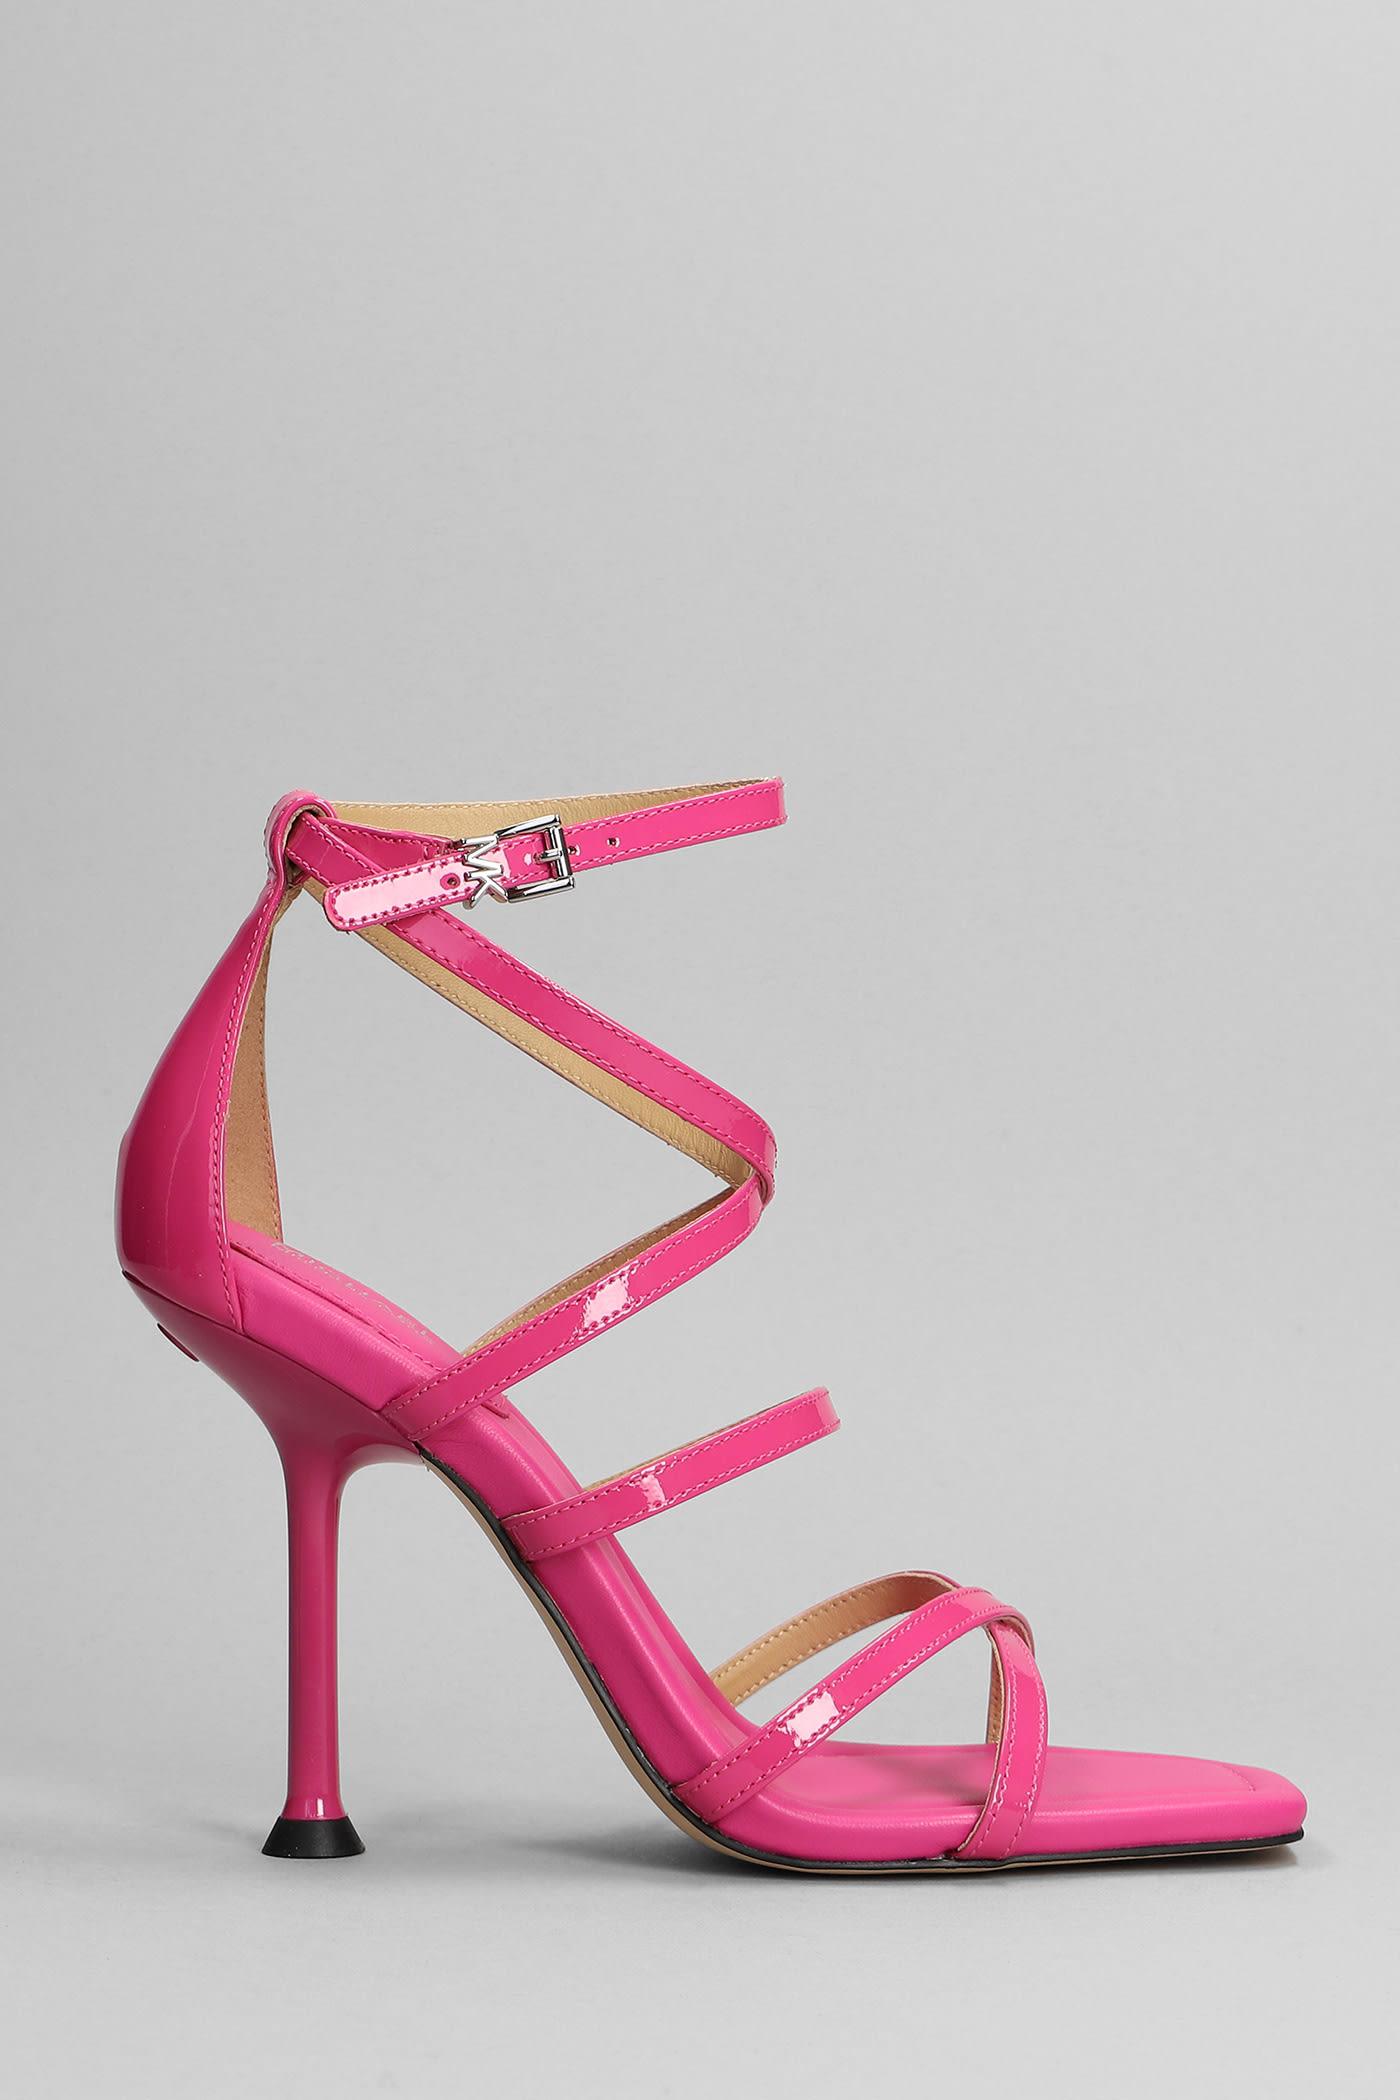 Michael Kors Imani Strappy Sandals In Fuxia Patent Leather in Pink | Lyst